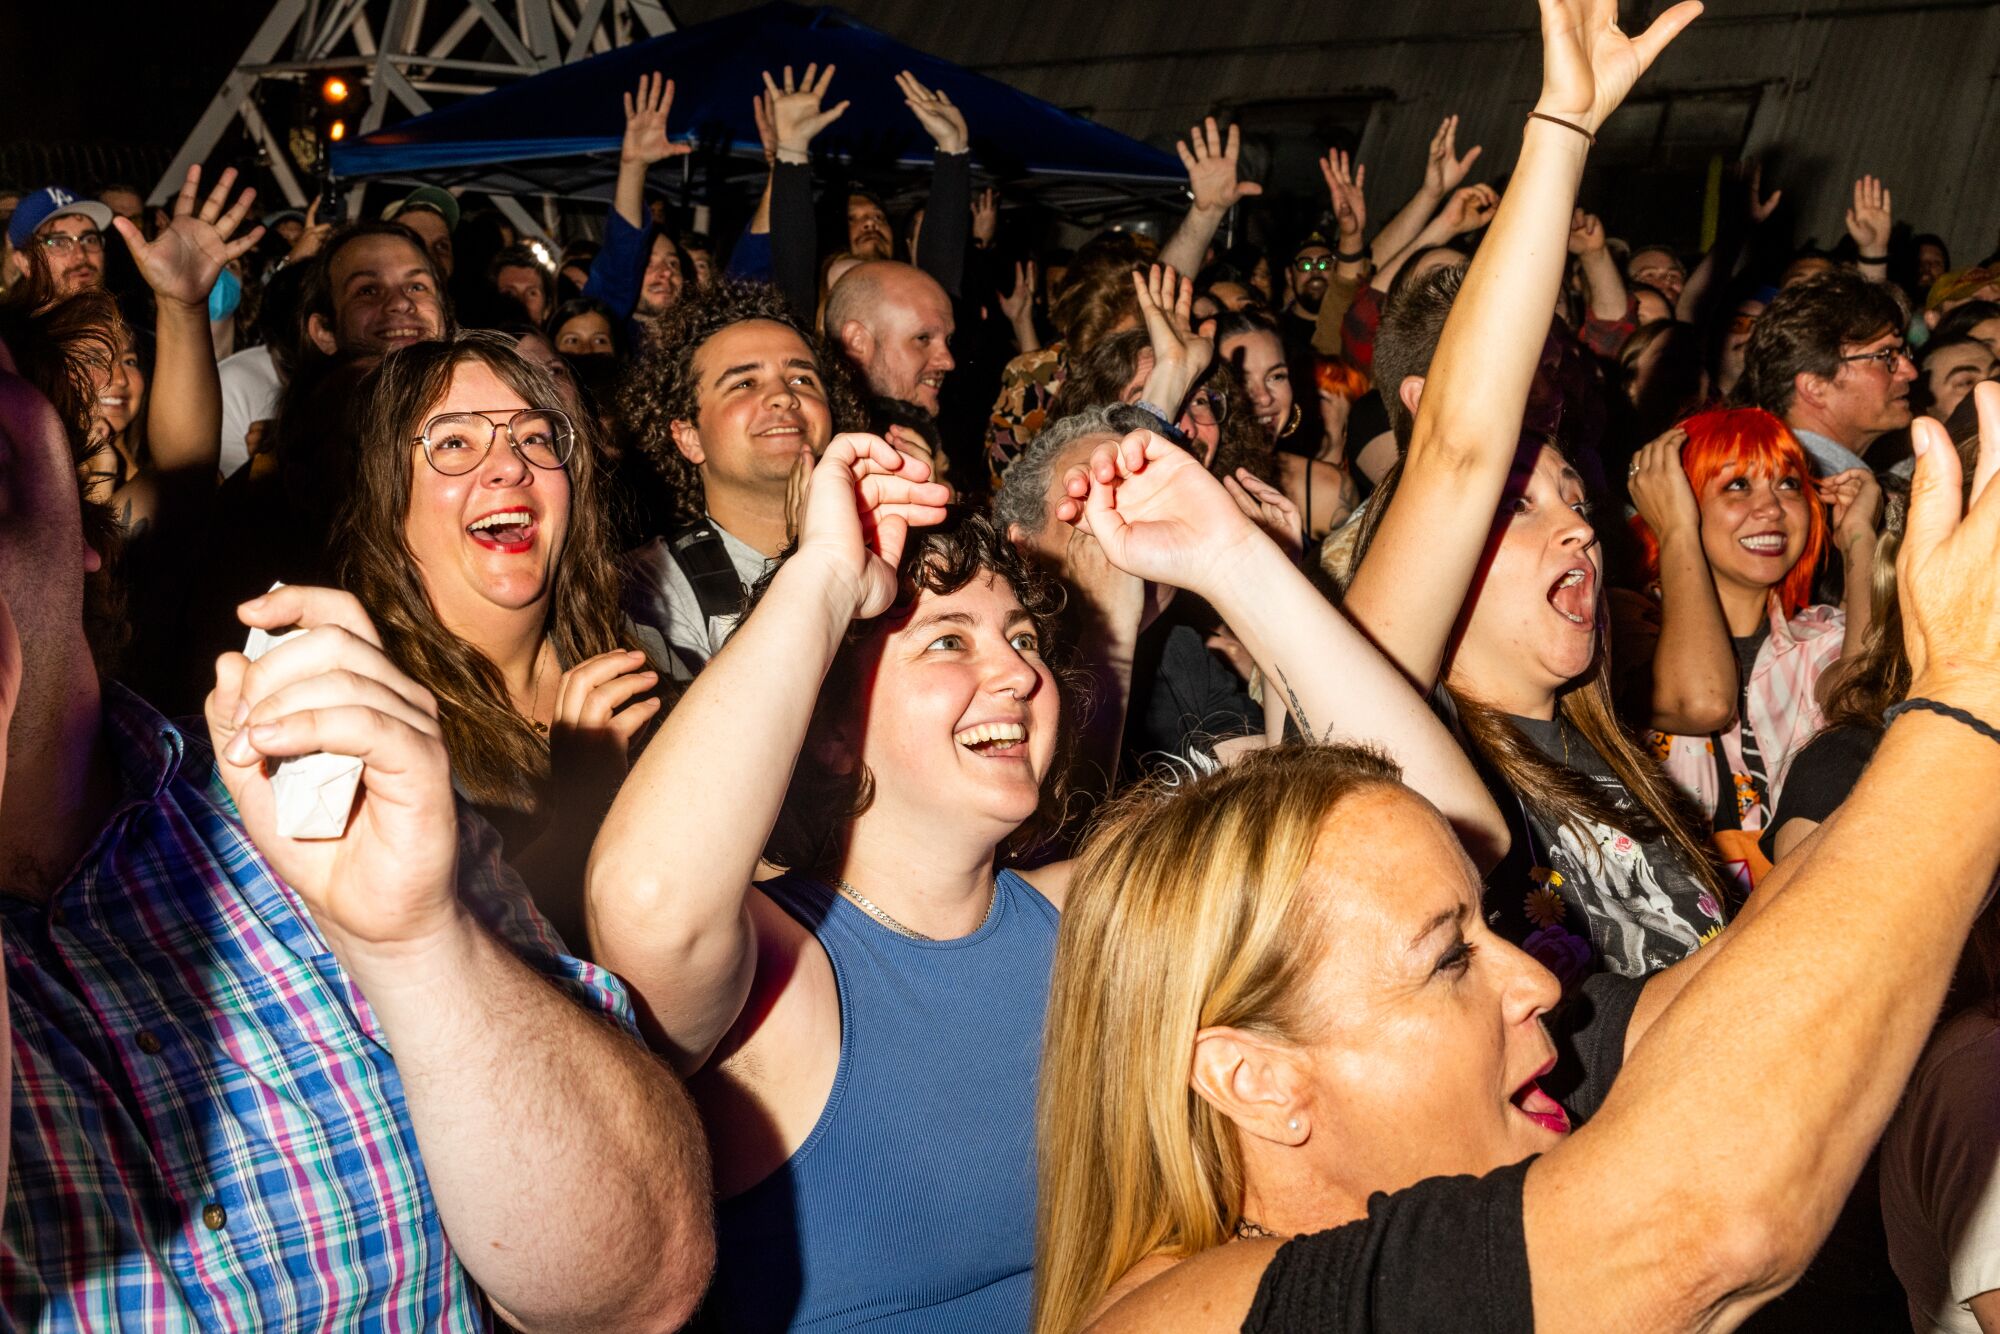 A crowd of people with excited facial expressions watch a performance.